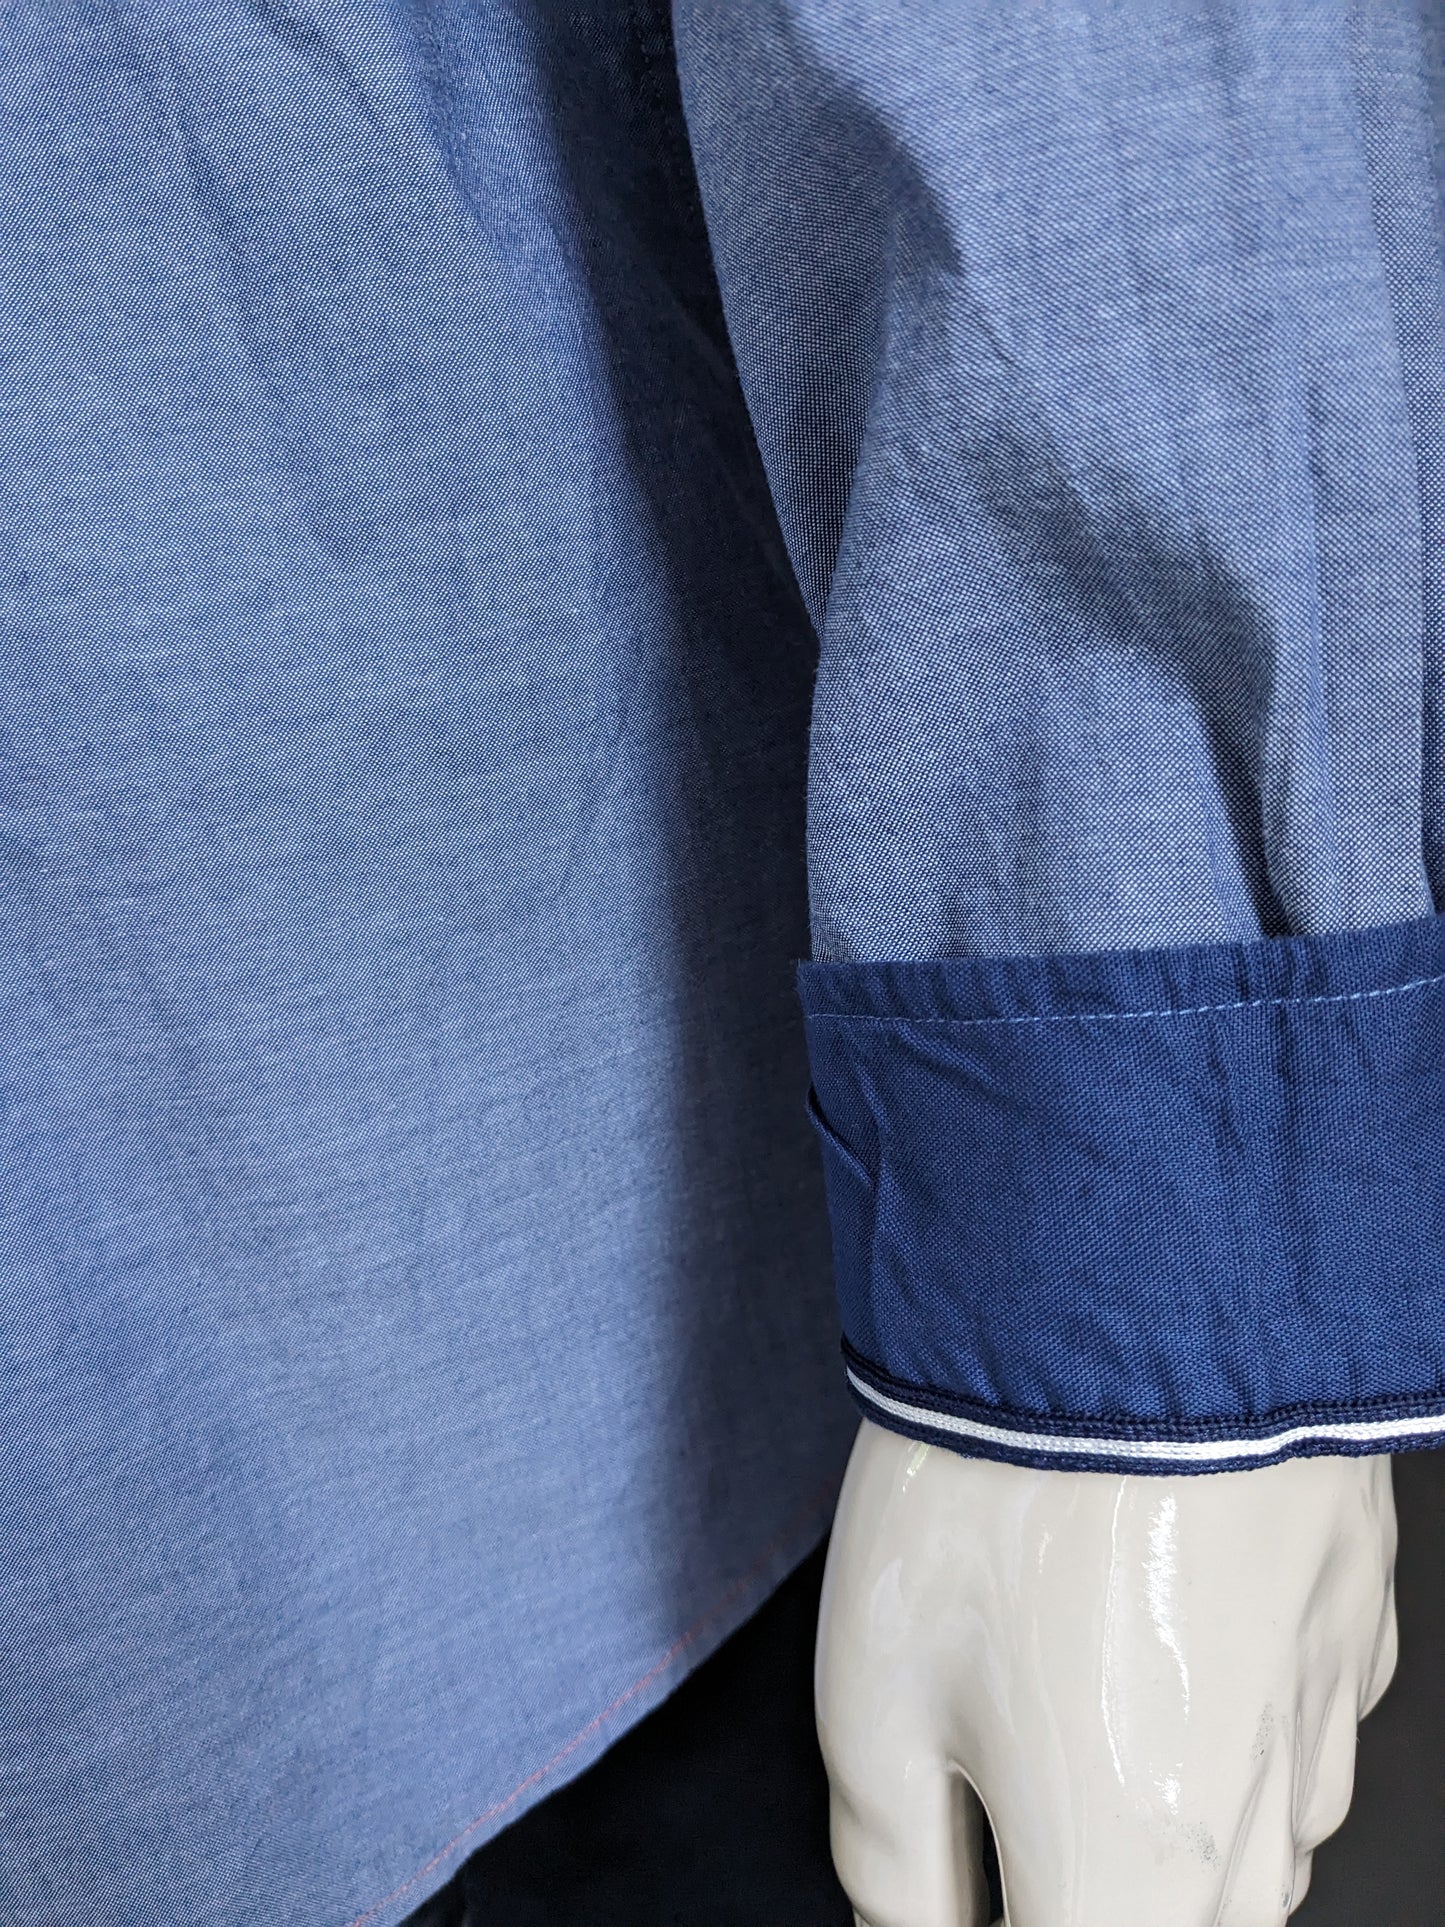 Tailor & Son shirt. Blue mixed with applications. Size 2XL / XXL.